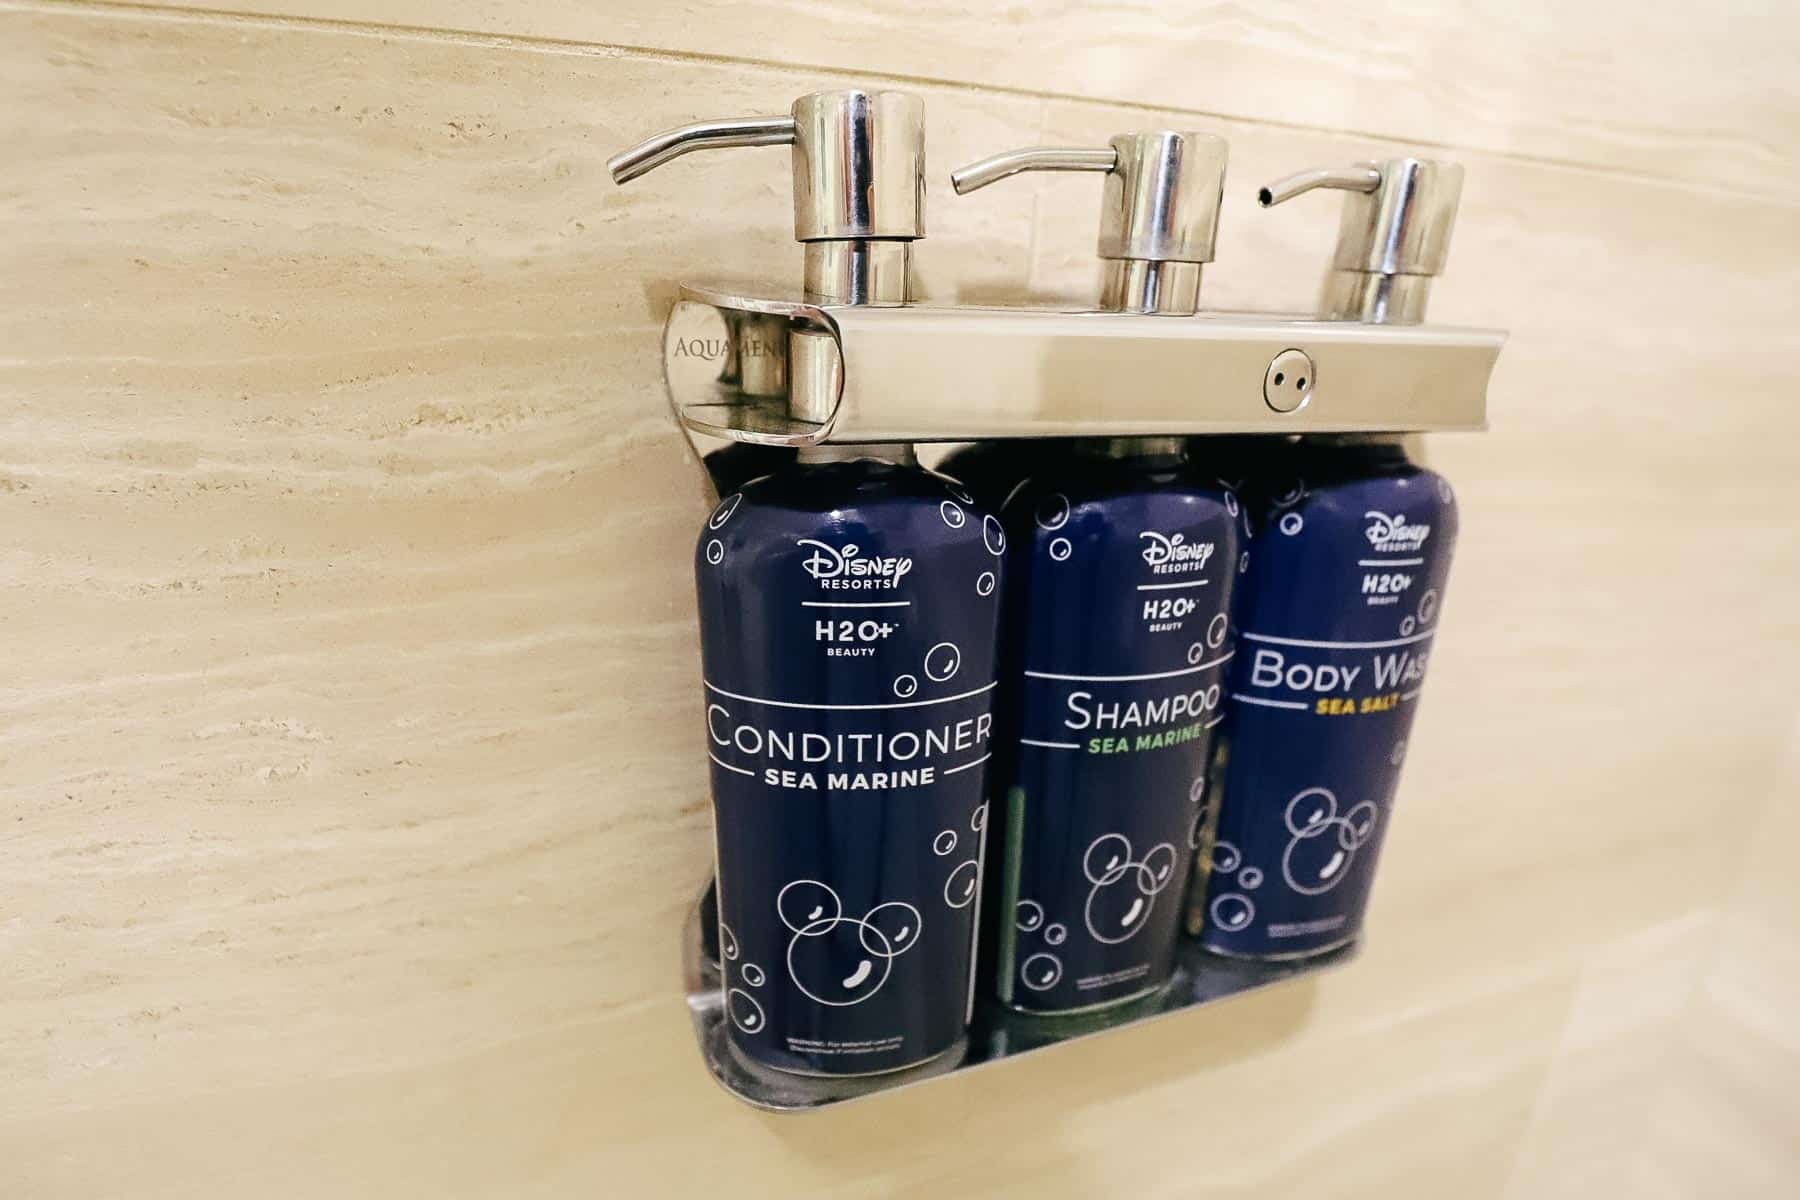 shampoo, conditioner, and body wash dispensers in the shower at Disney's Boardwalk